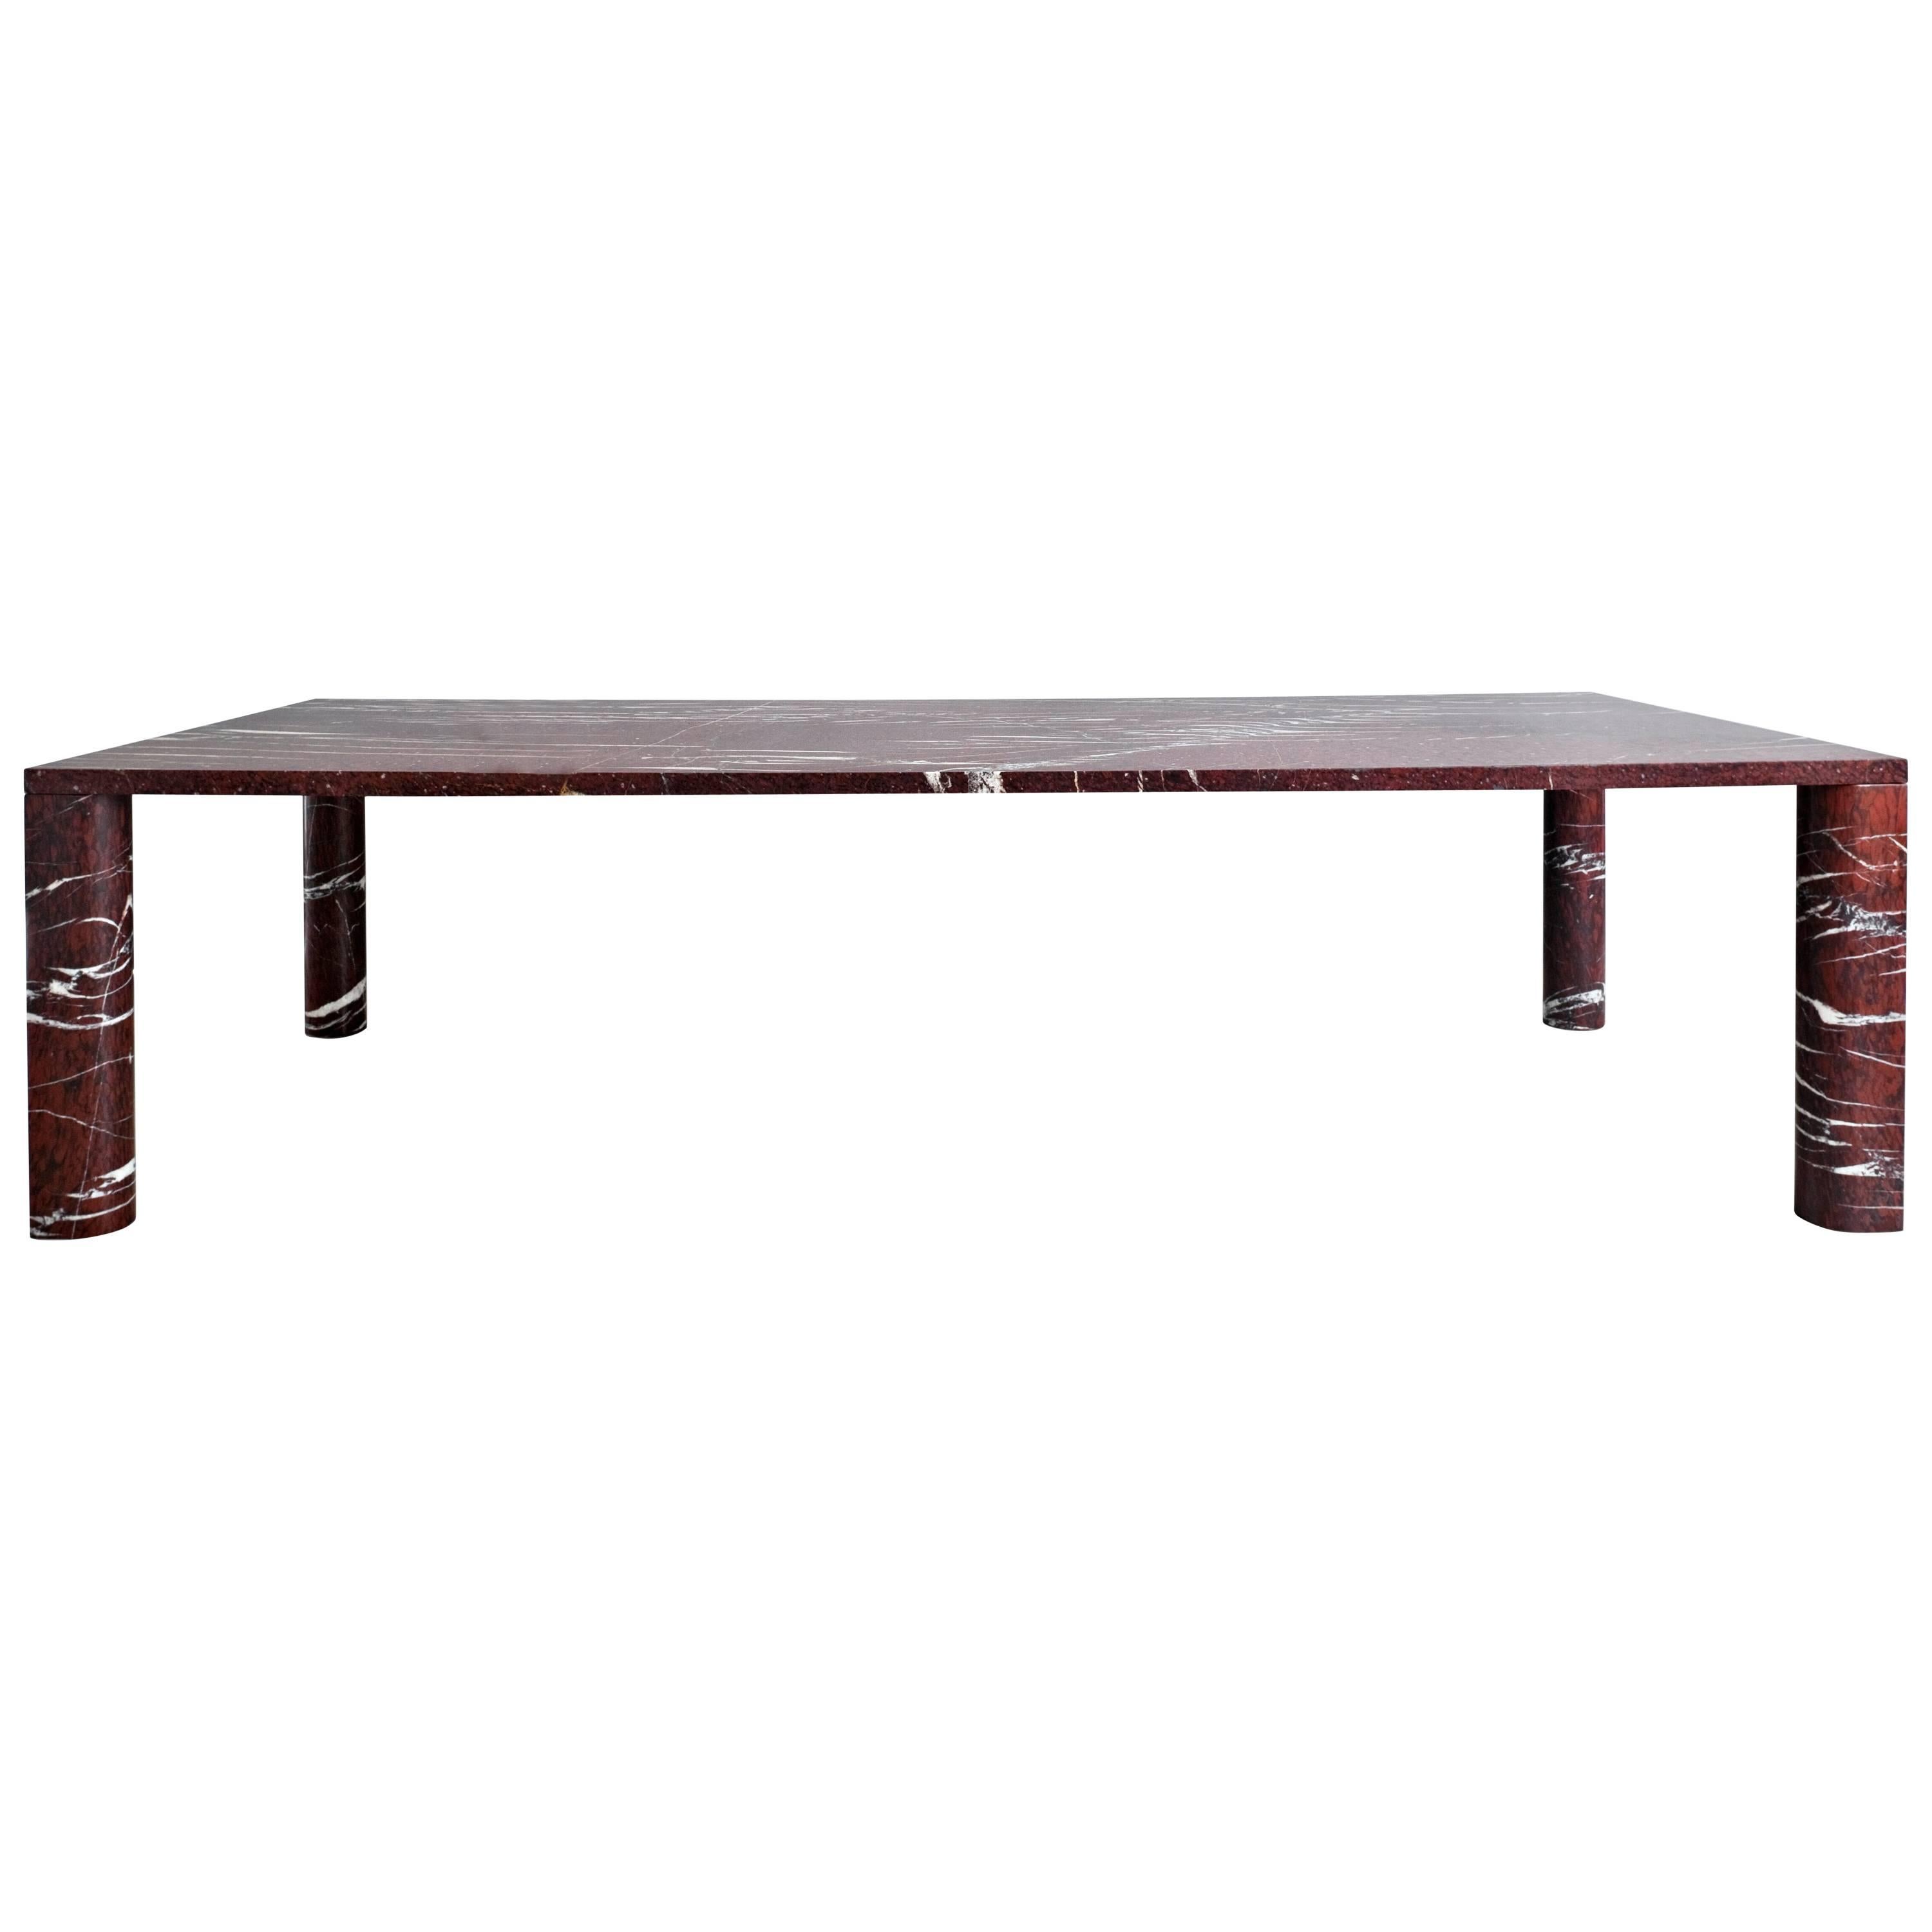 Salvatori 'Love Me, Love Me Not' Rectangular Dining Table in Rouge du Roi Marble For Sale